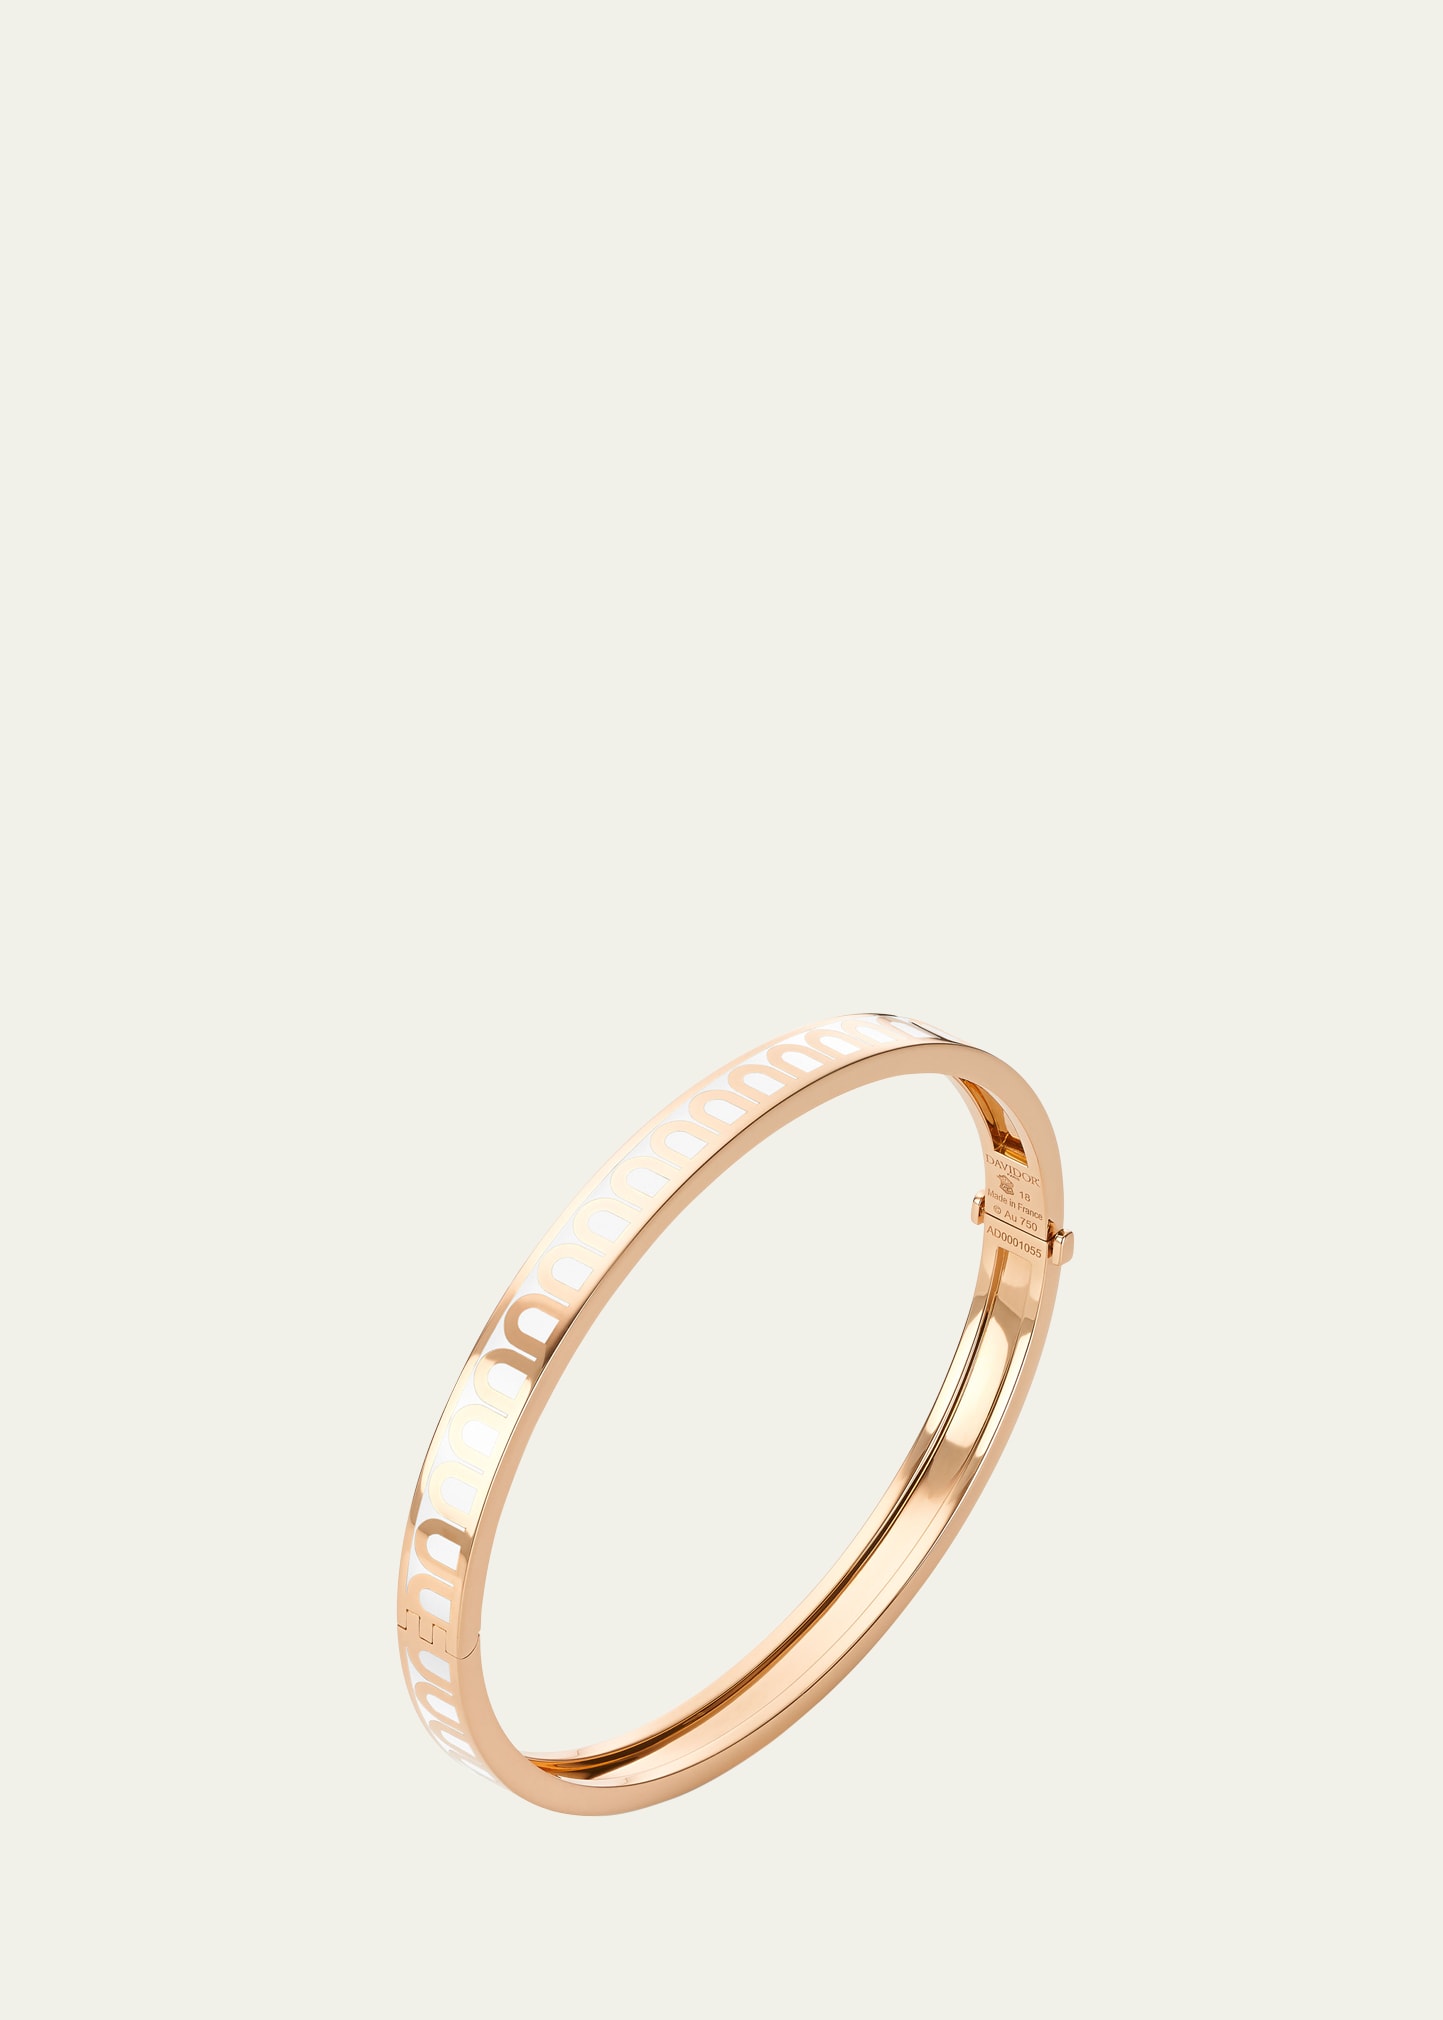 Davidor L'arc De  Bangle Pm In 18k Rose Gold With Neige Lacquered Ceramic